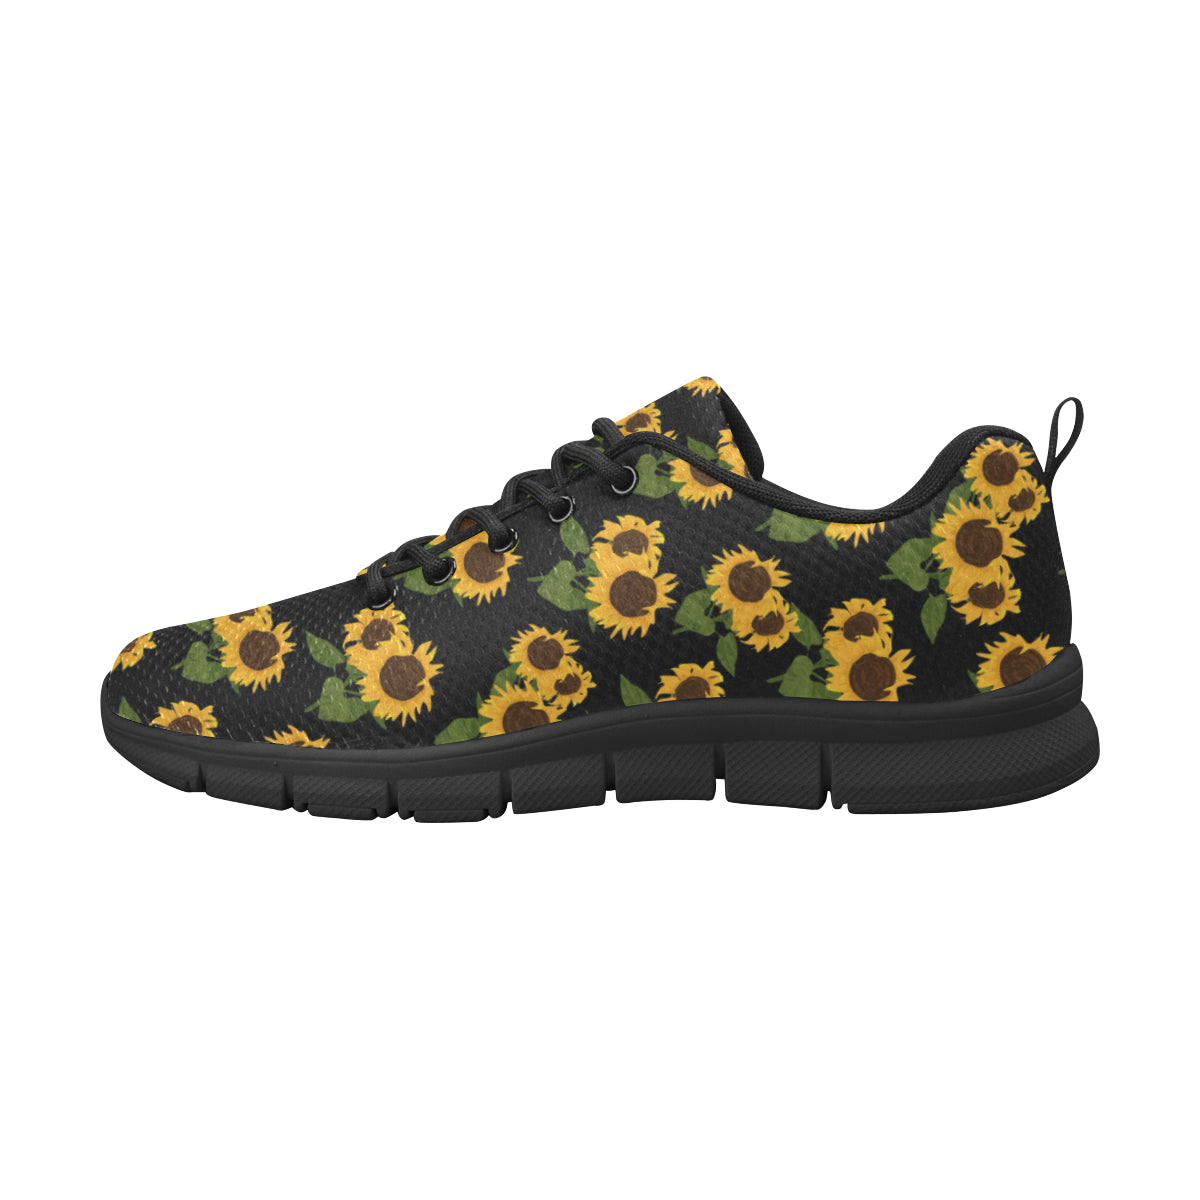 Sunflower Women Sneakers, Black Yellow Floral, Custom Floral Cute Women's Breathable Colorful Vegan Mesh Canvas Athletic Sports Shoes Starcove Fashion